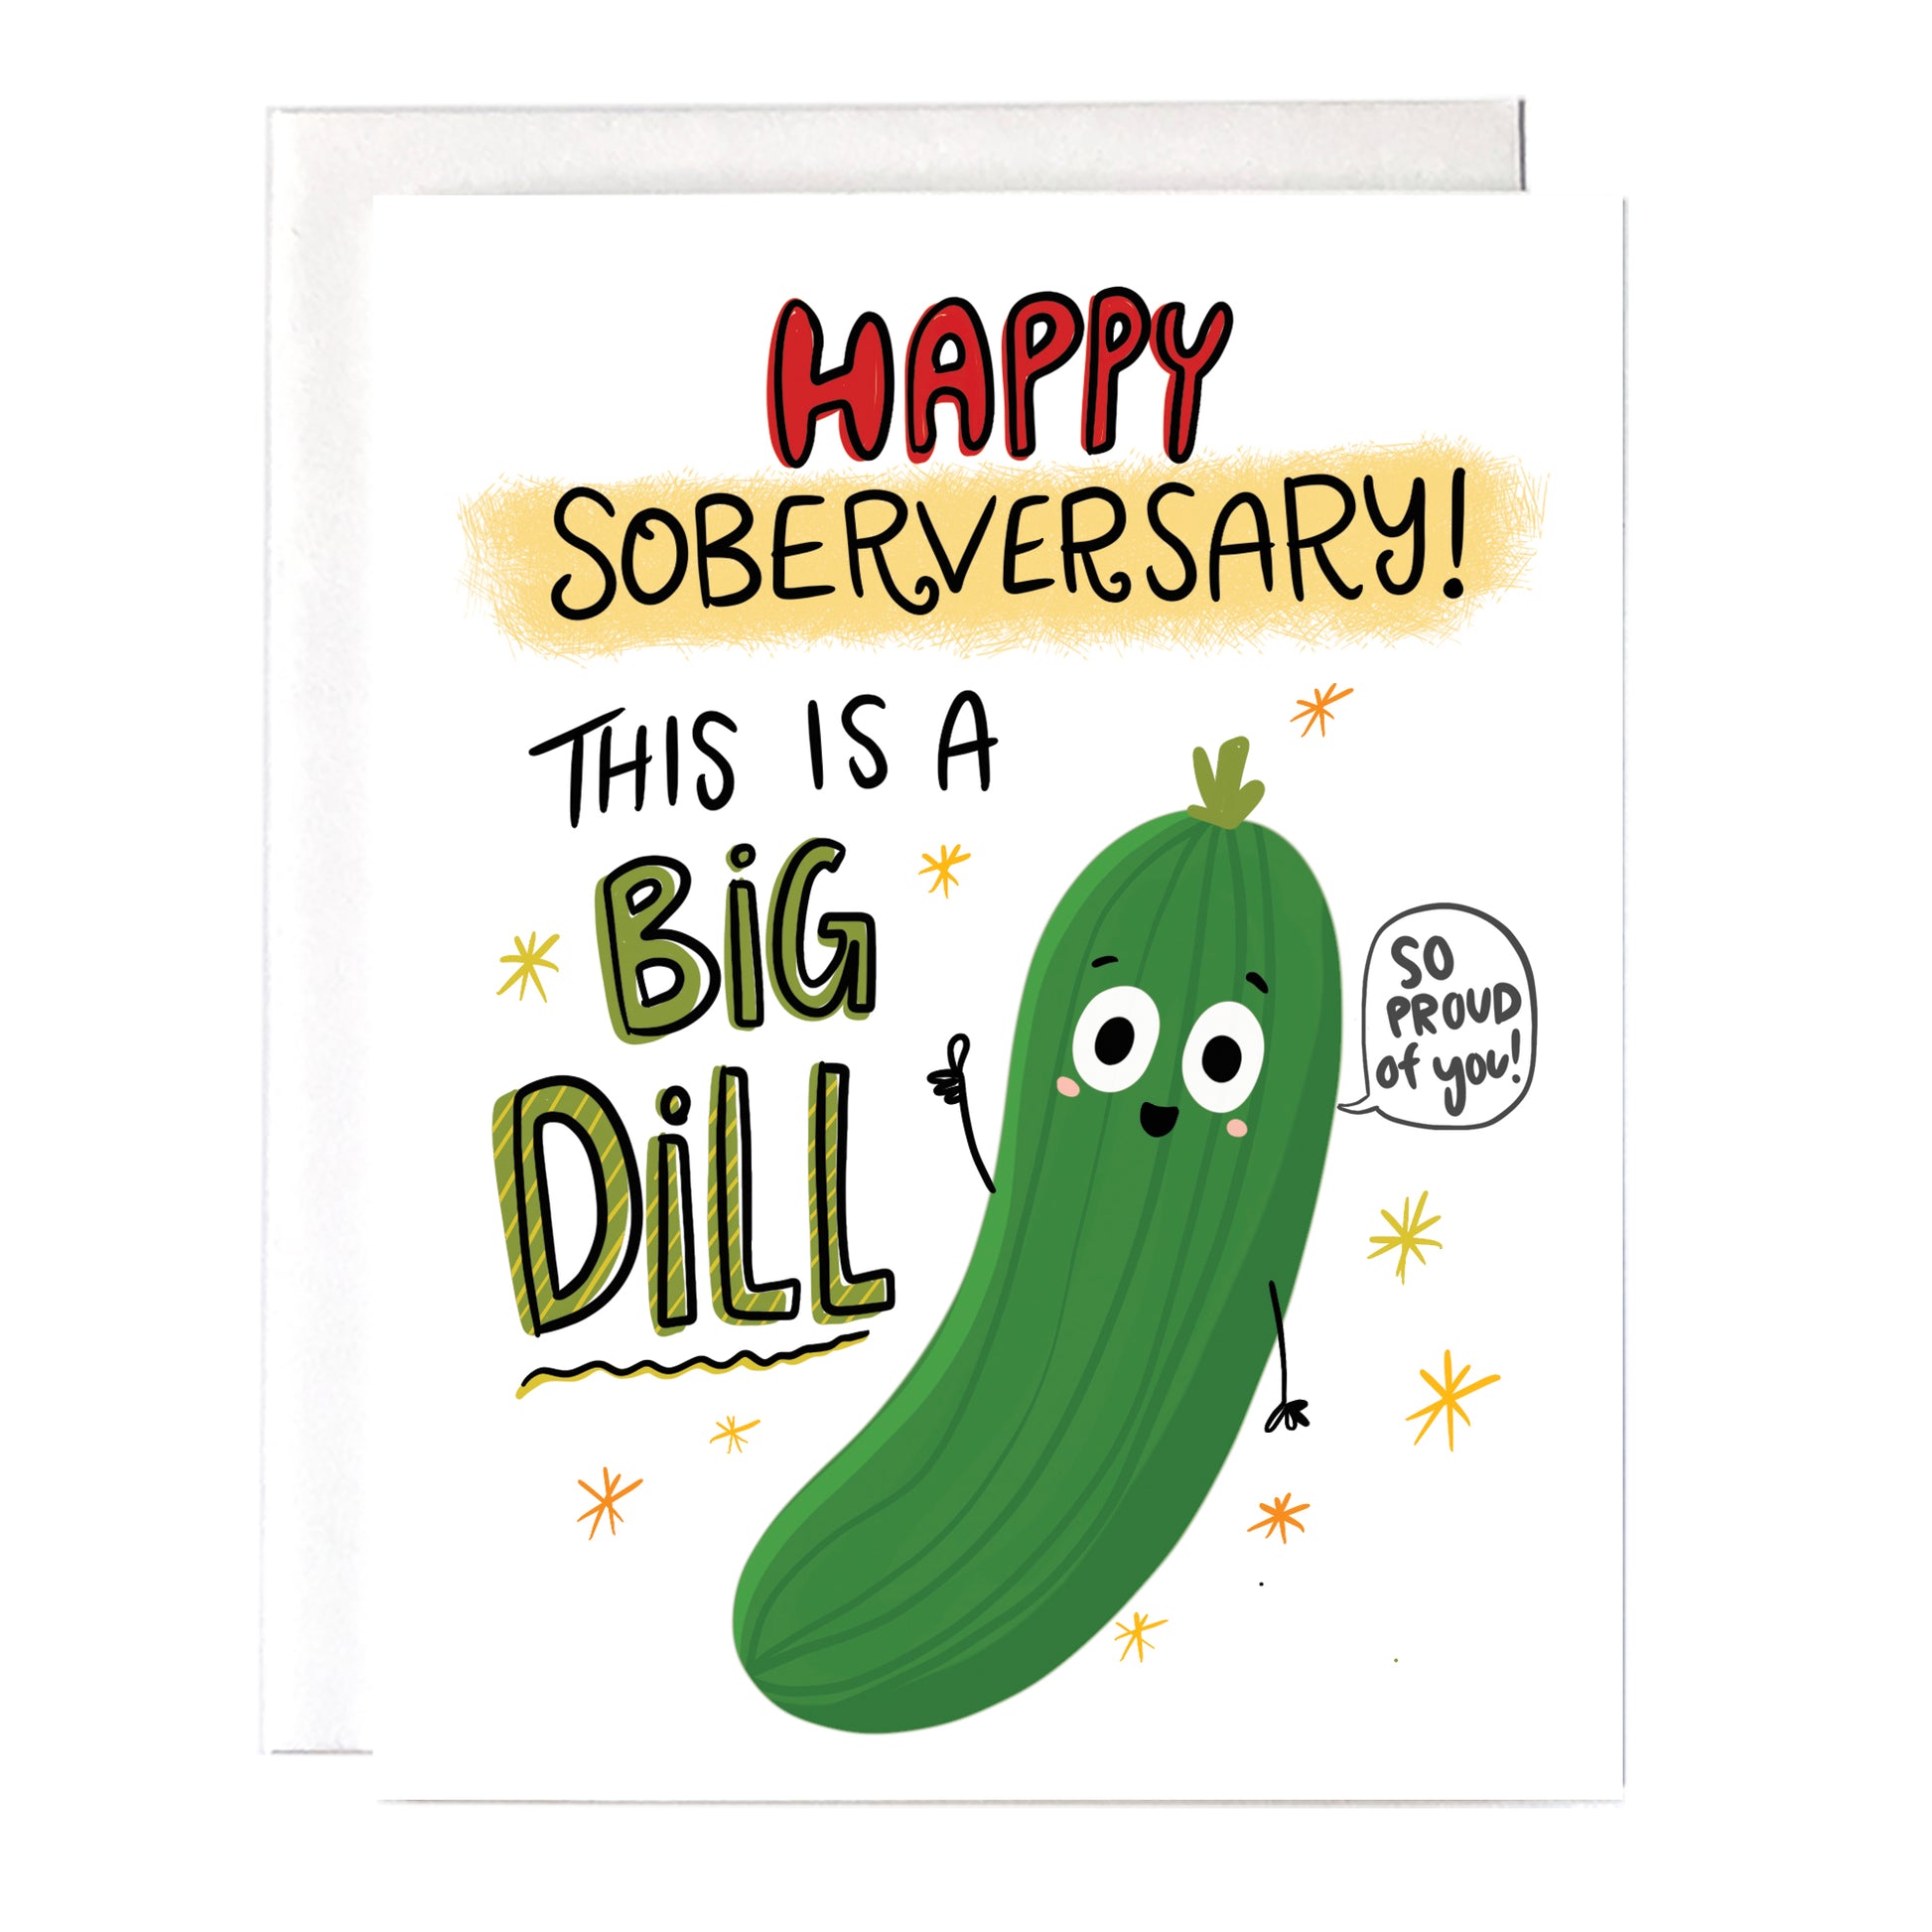 Congratulate someone on their sobriety milestone! Perfect for any type of soberversary. Size A2 greeting card (4.25" x 5.5") with envelope, blank Inside. All cards are designed and Illustrated with love by me, Anna Fox, and are printed at my friendly neighborhood print shop in Denver, CO.